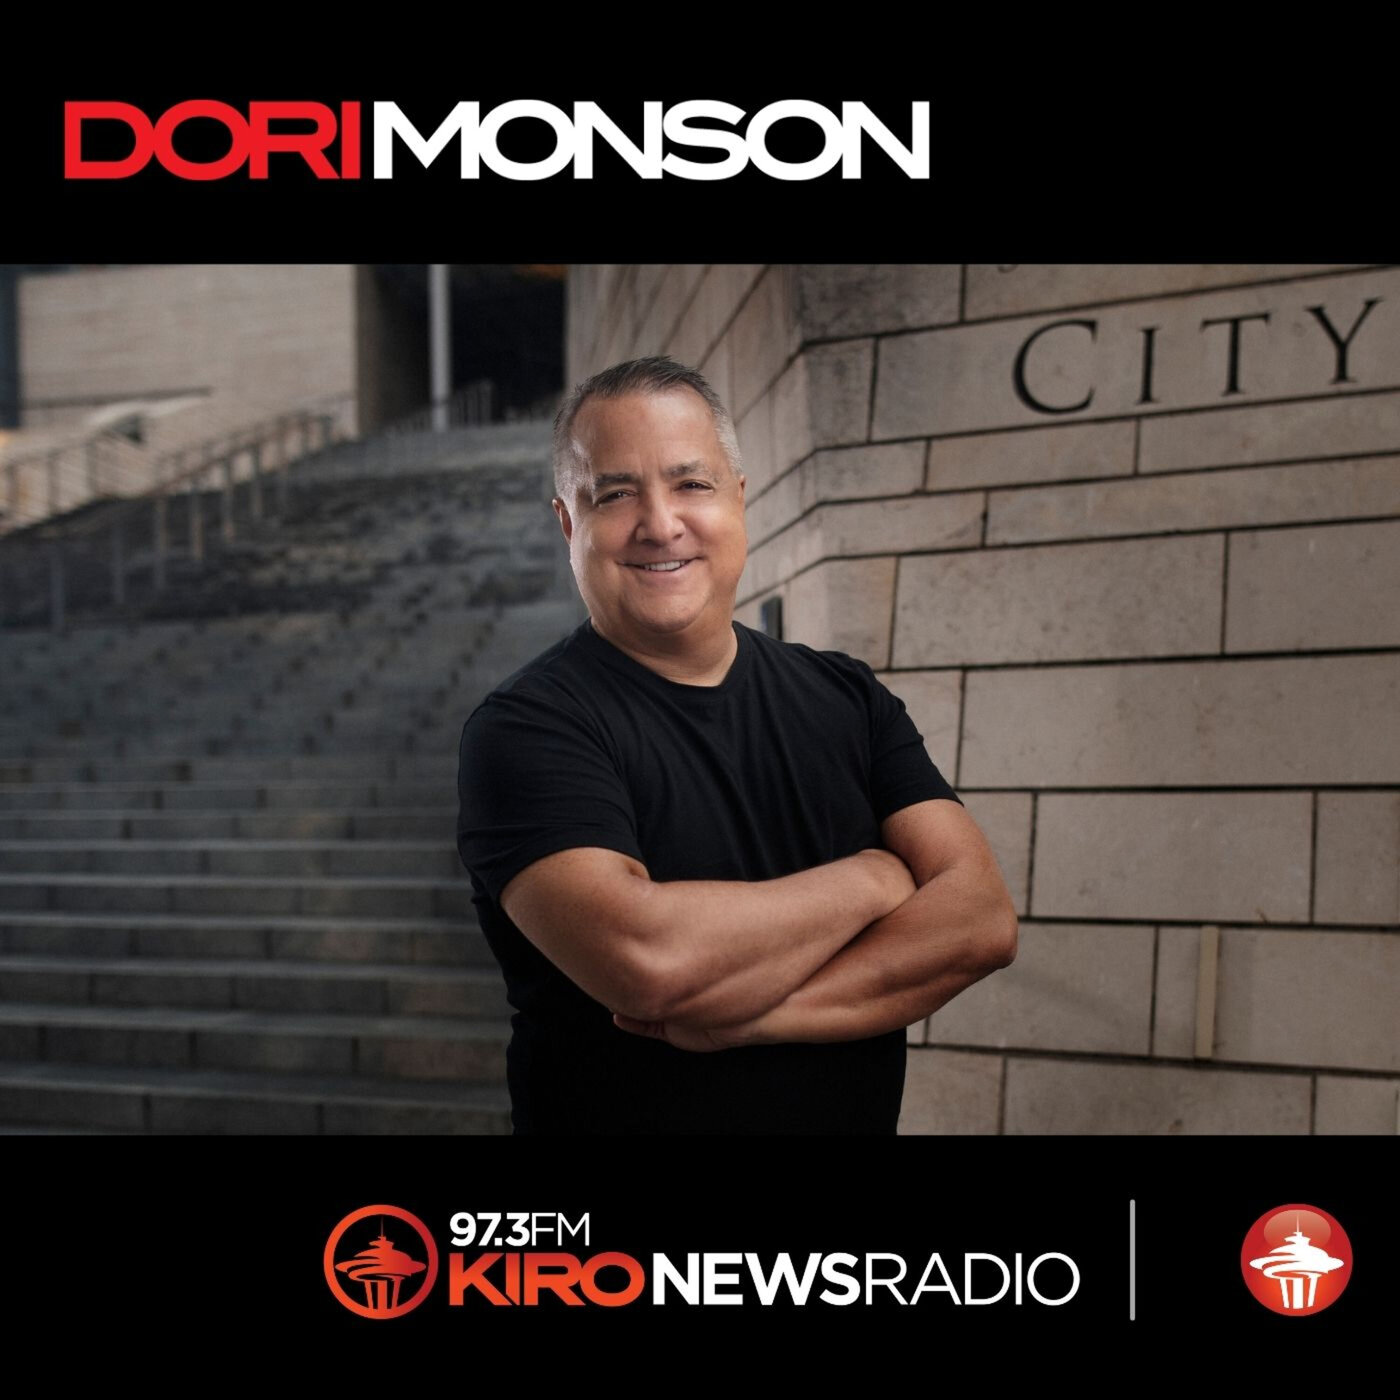 The Very Best of the Dori Monson Show, Day 3: Hour 1